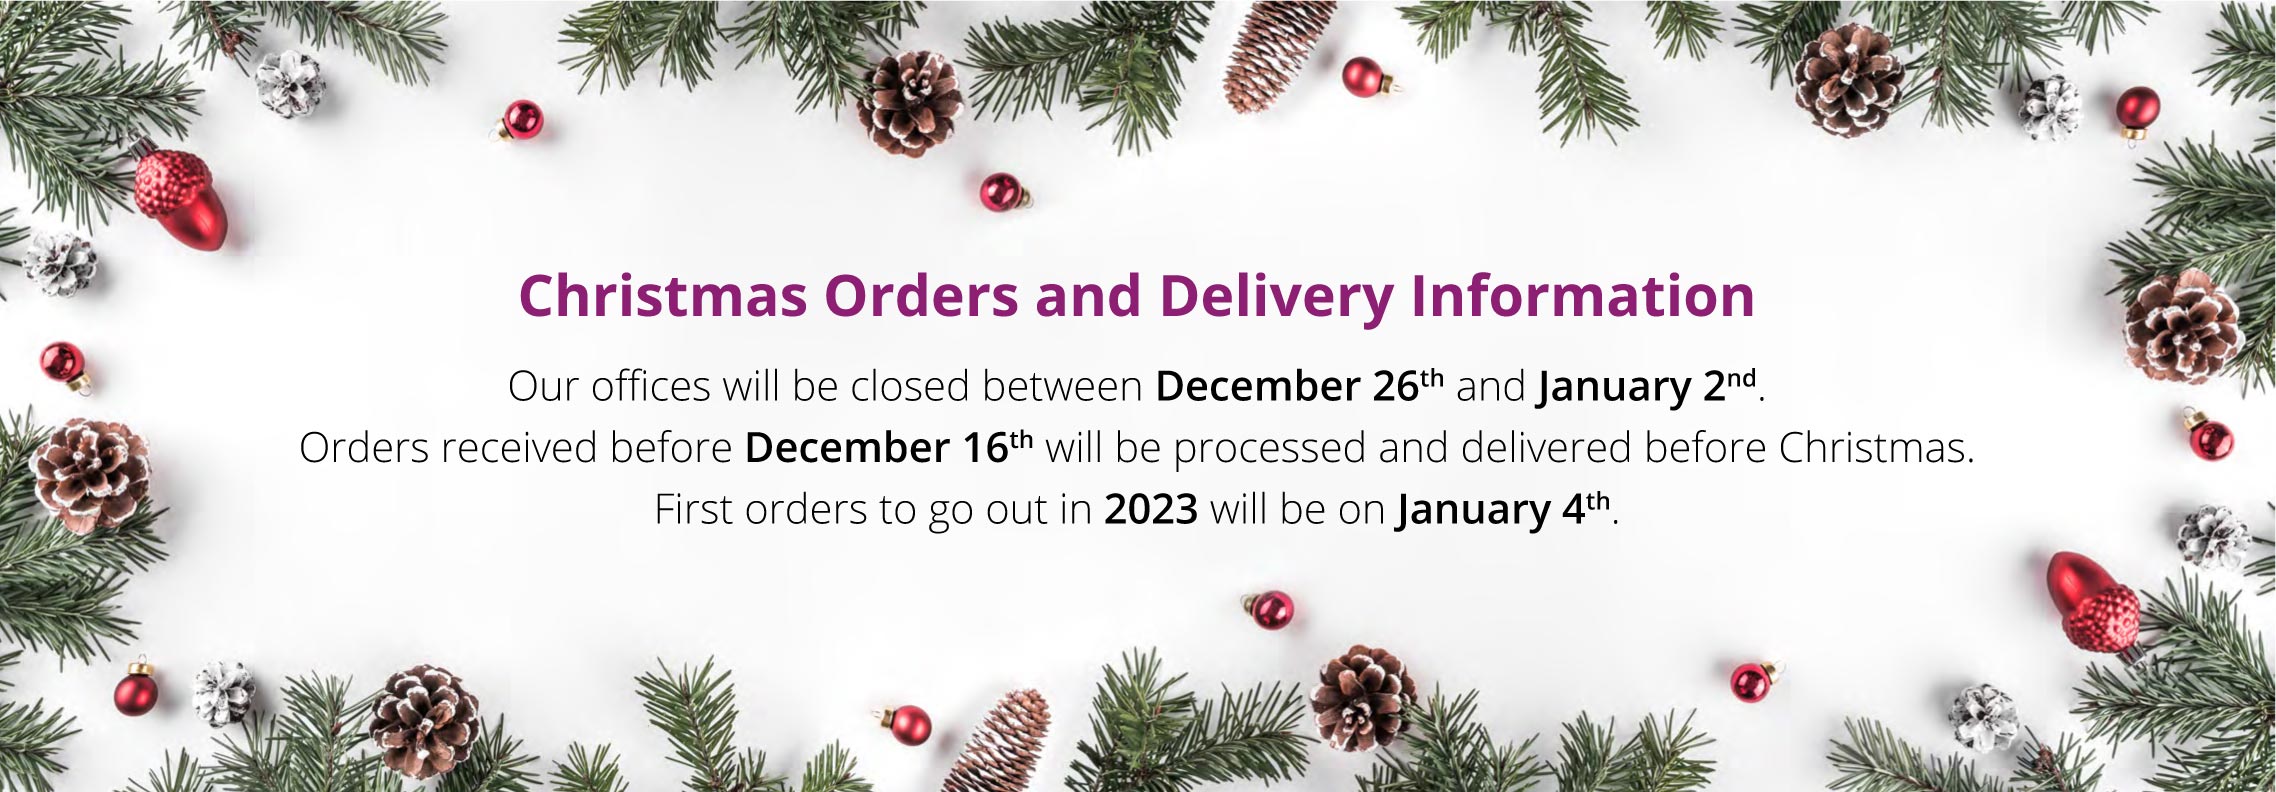 Christmas Orders and Delivery Information